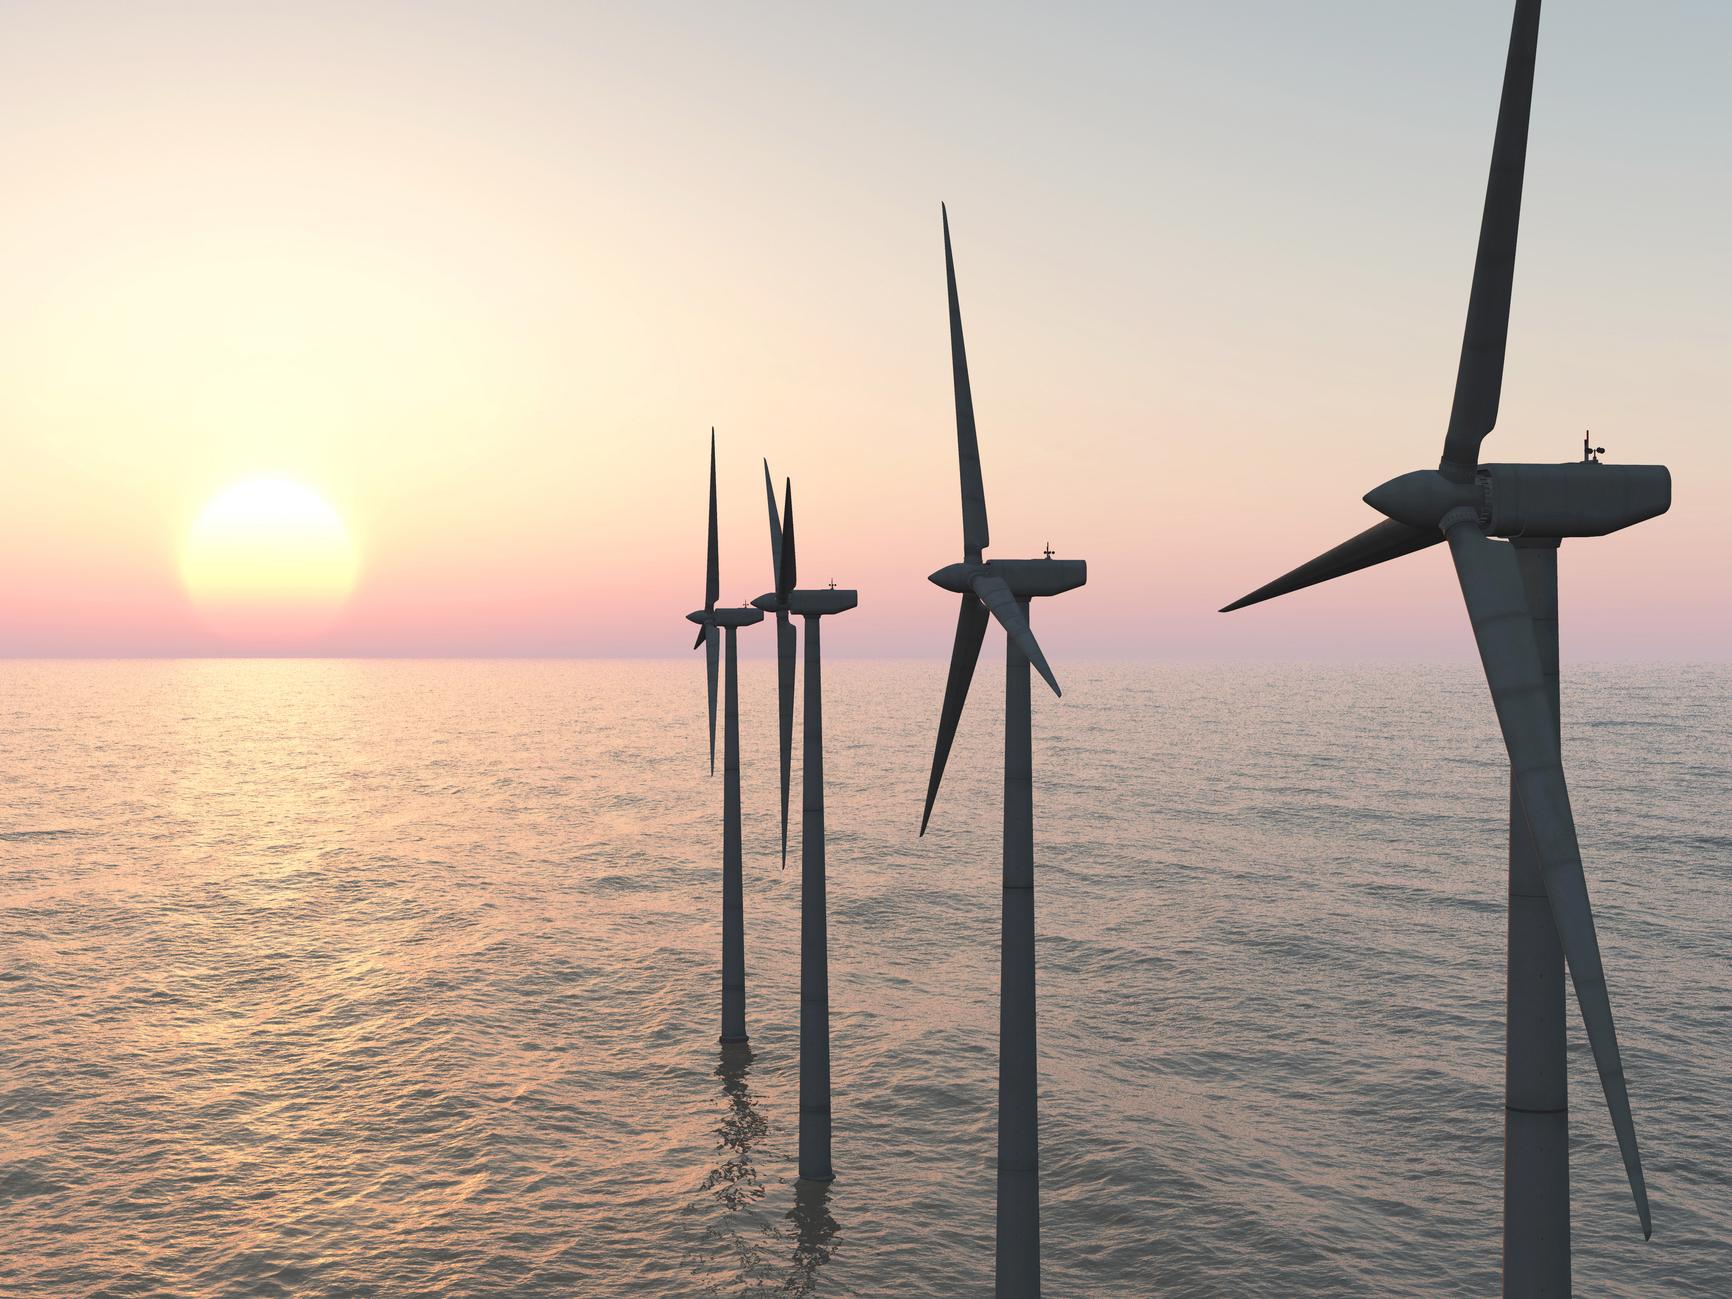 New areas of seabed opened up for windfarms could provide 7GW of energy for UK